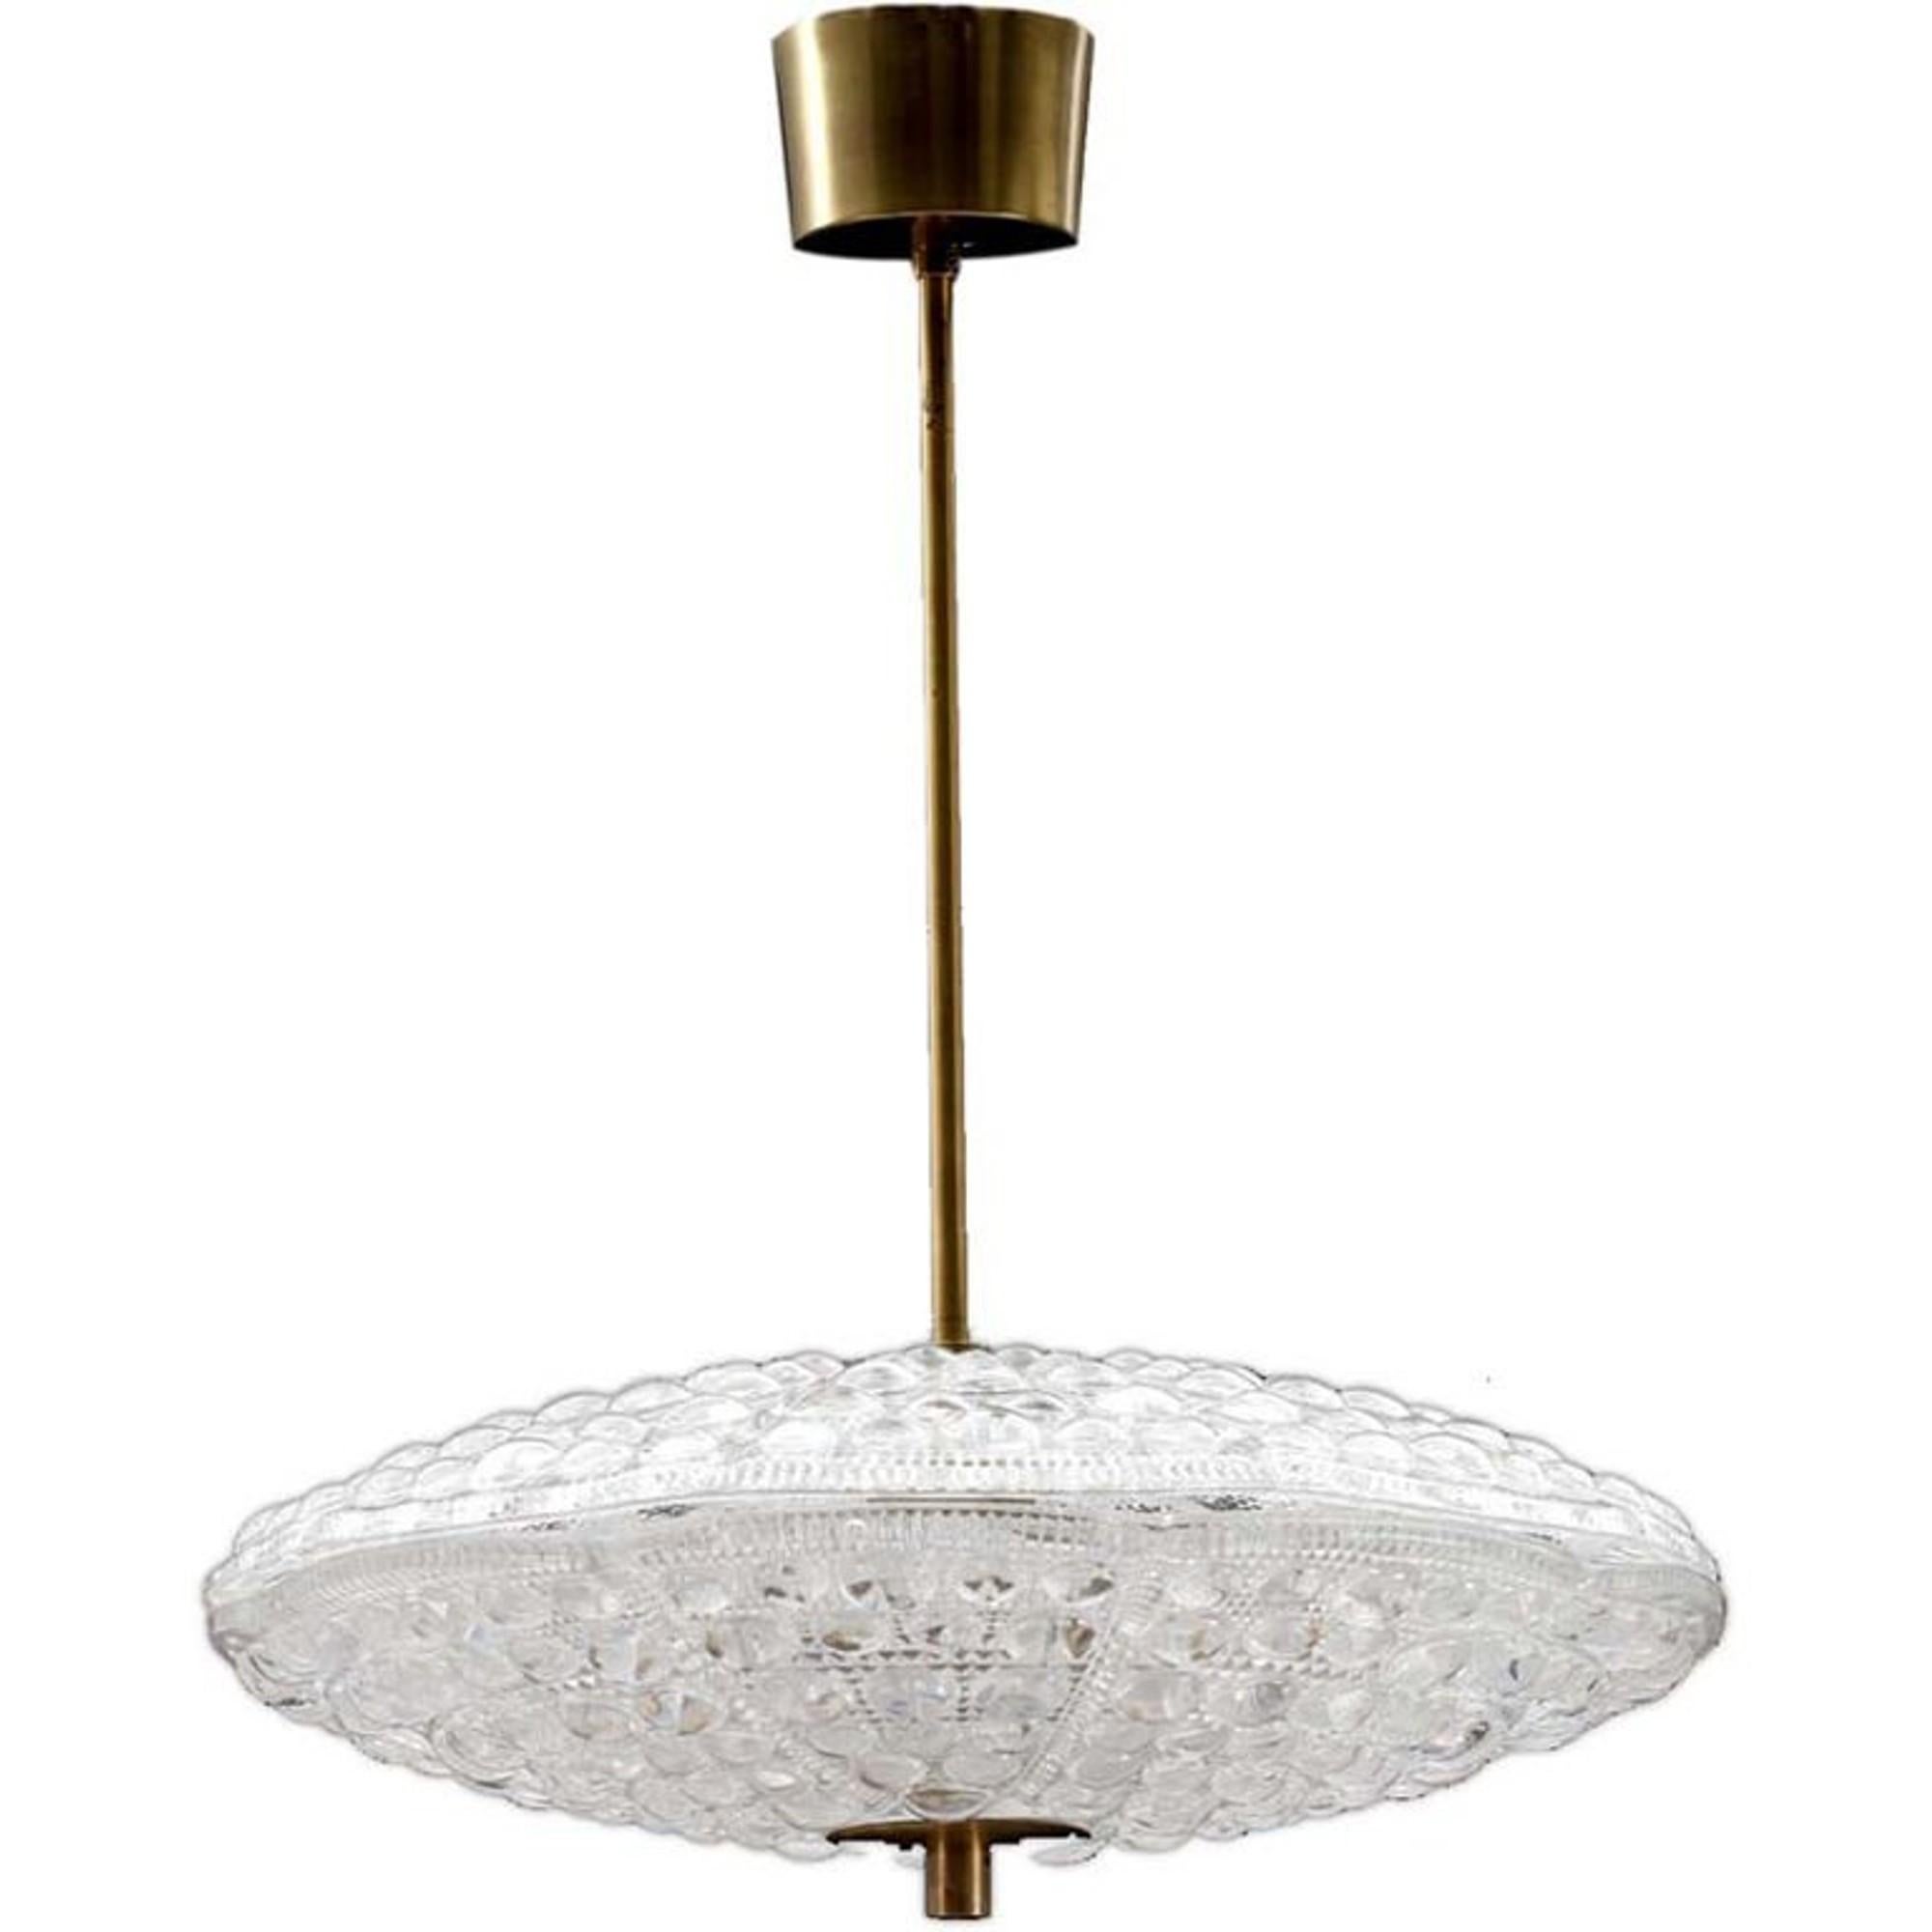 Pair of Flying Saucer shaped chandelier in two pieces. Beautiful textured glass with brass fittings. Designed by Carl Fagerlund for the Swedish glass maker Orrefors.
Takes five candelabra basebulbs.

Existing old wiring, rewiring complementary, let